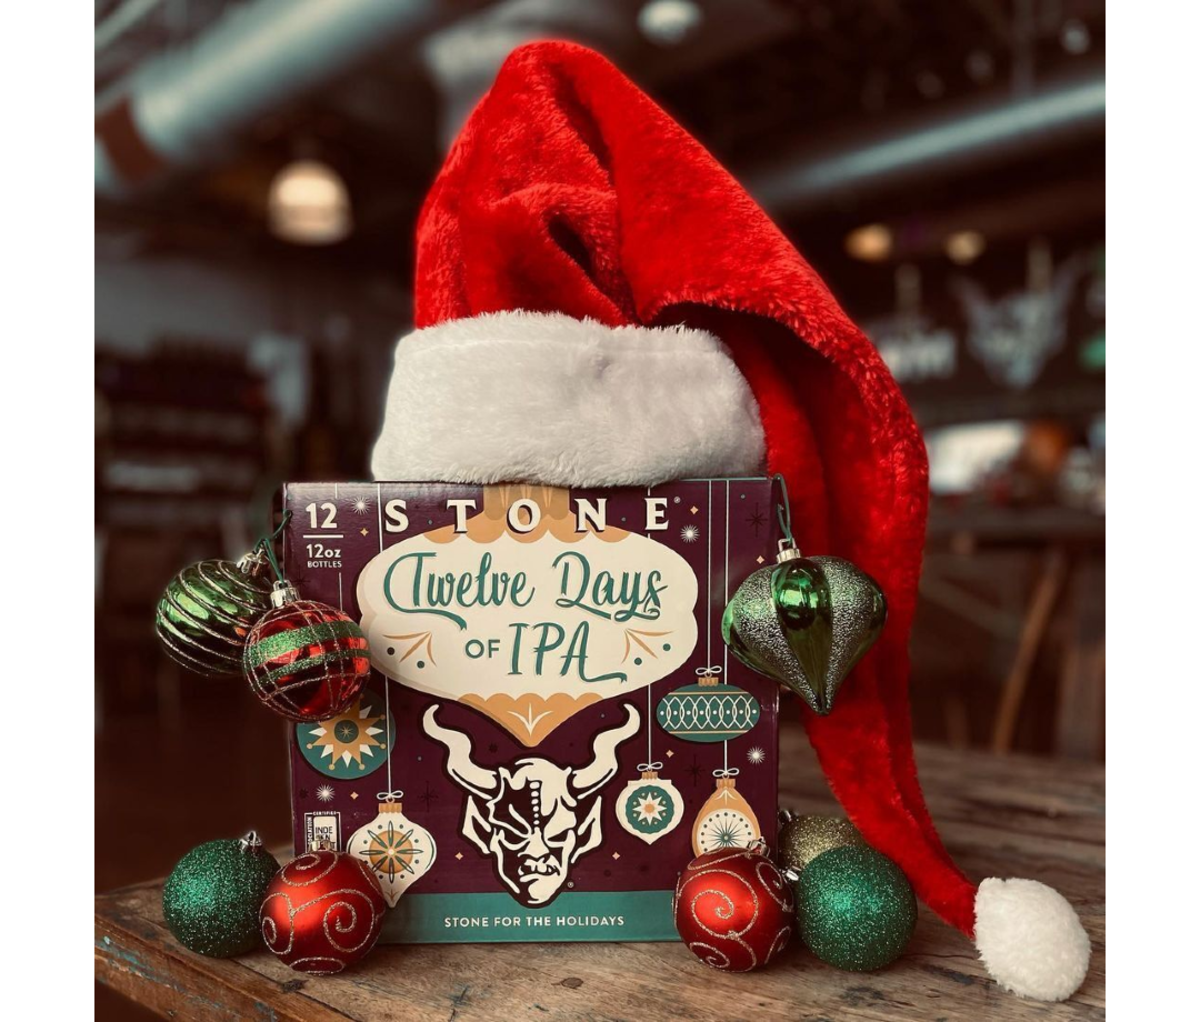 Stone Brewing 12 Days of IPAs with christmas decor